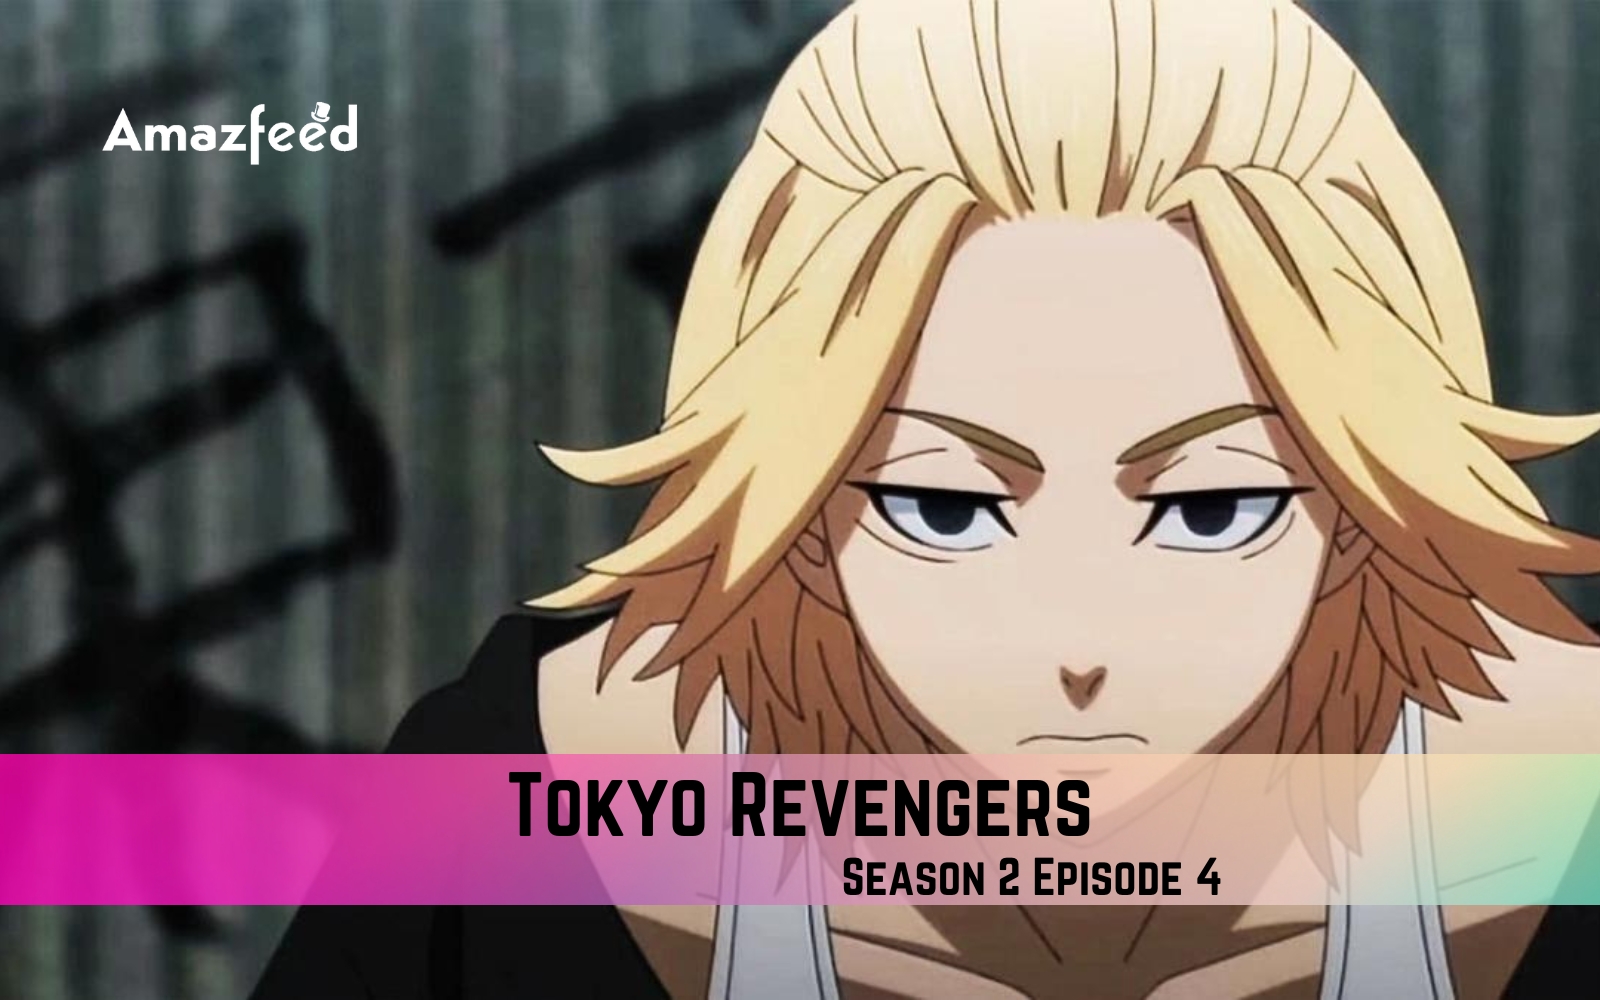 Tokyo Revengers season 3 episode 4: Exact release date and time